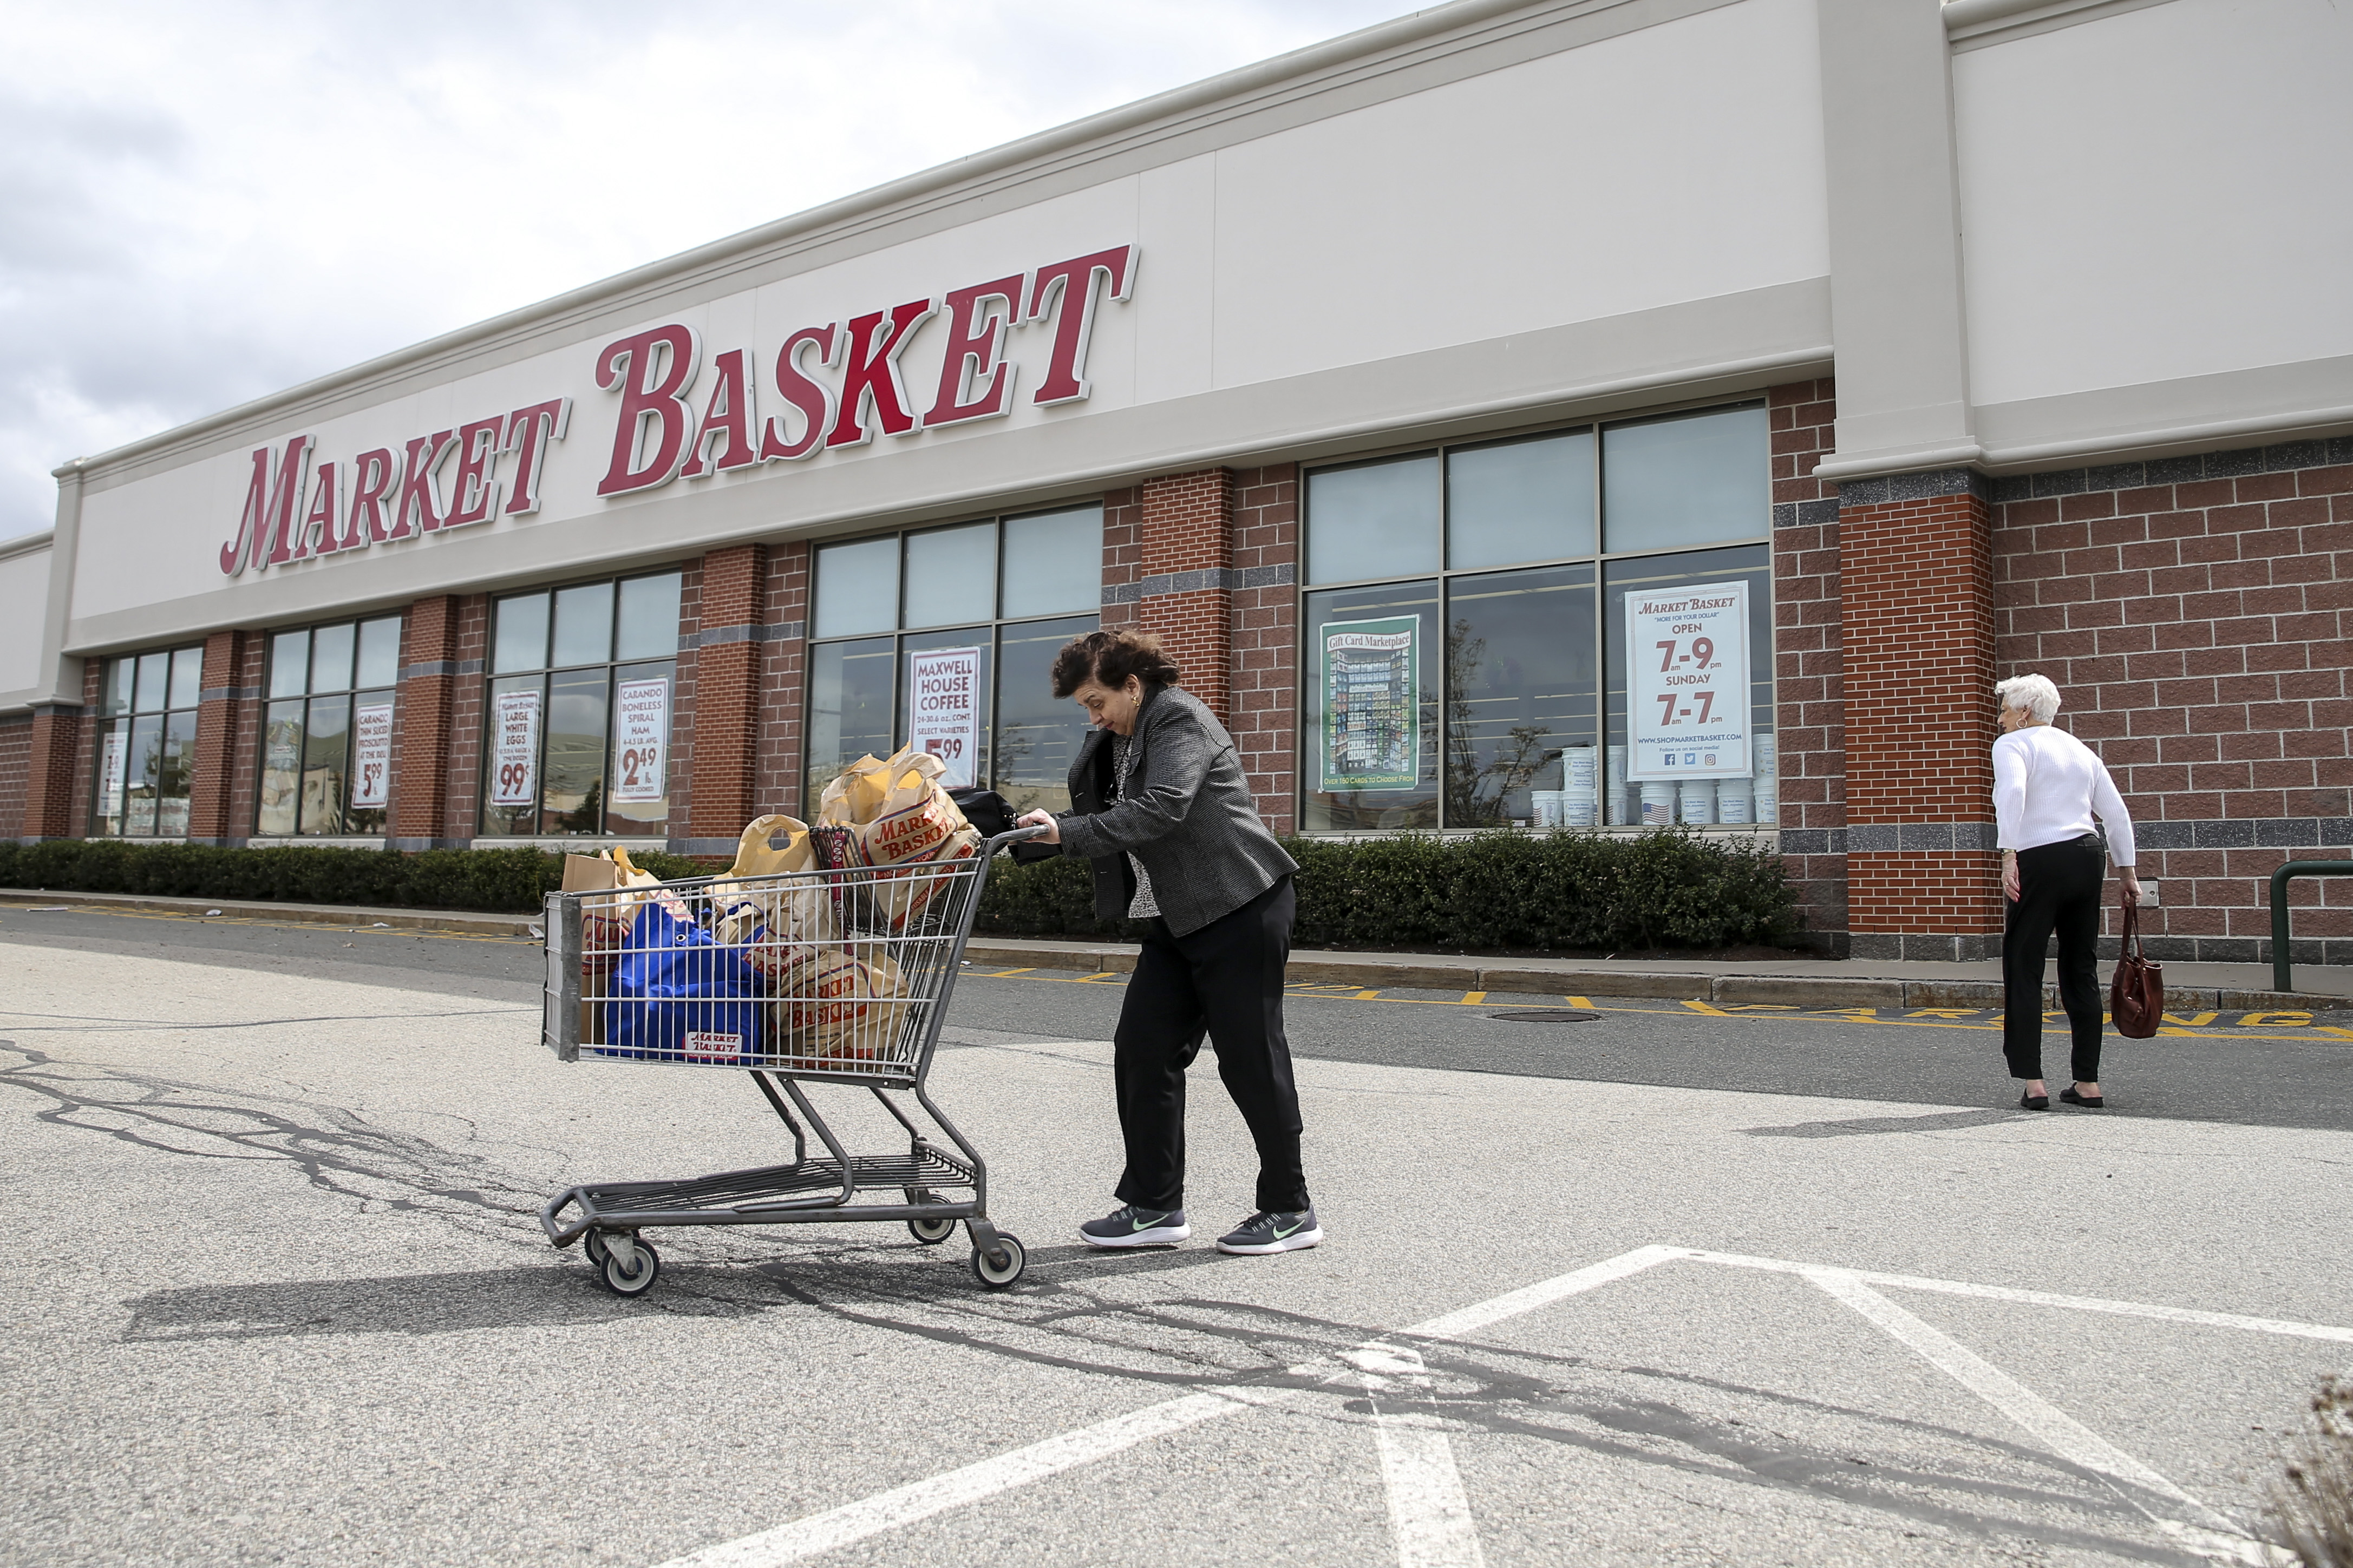 Market Basket is opening its first Rhode Island location this week